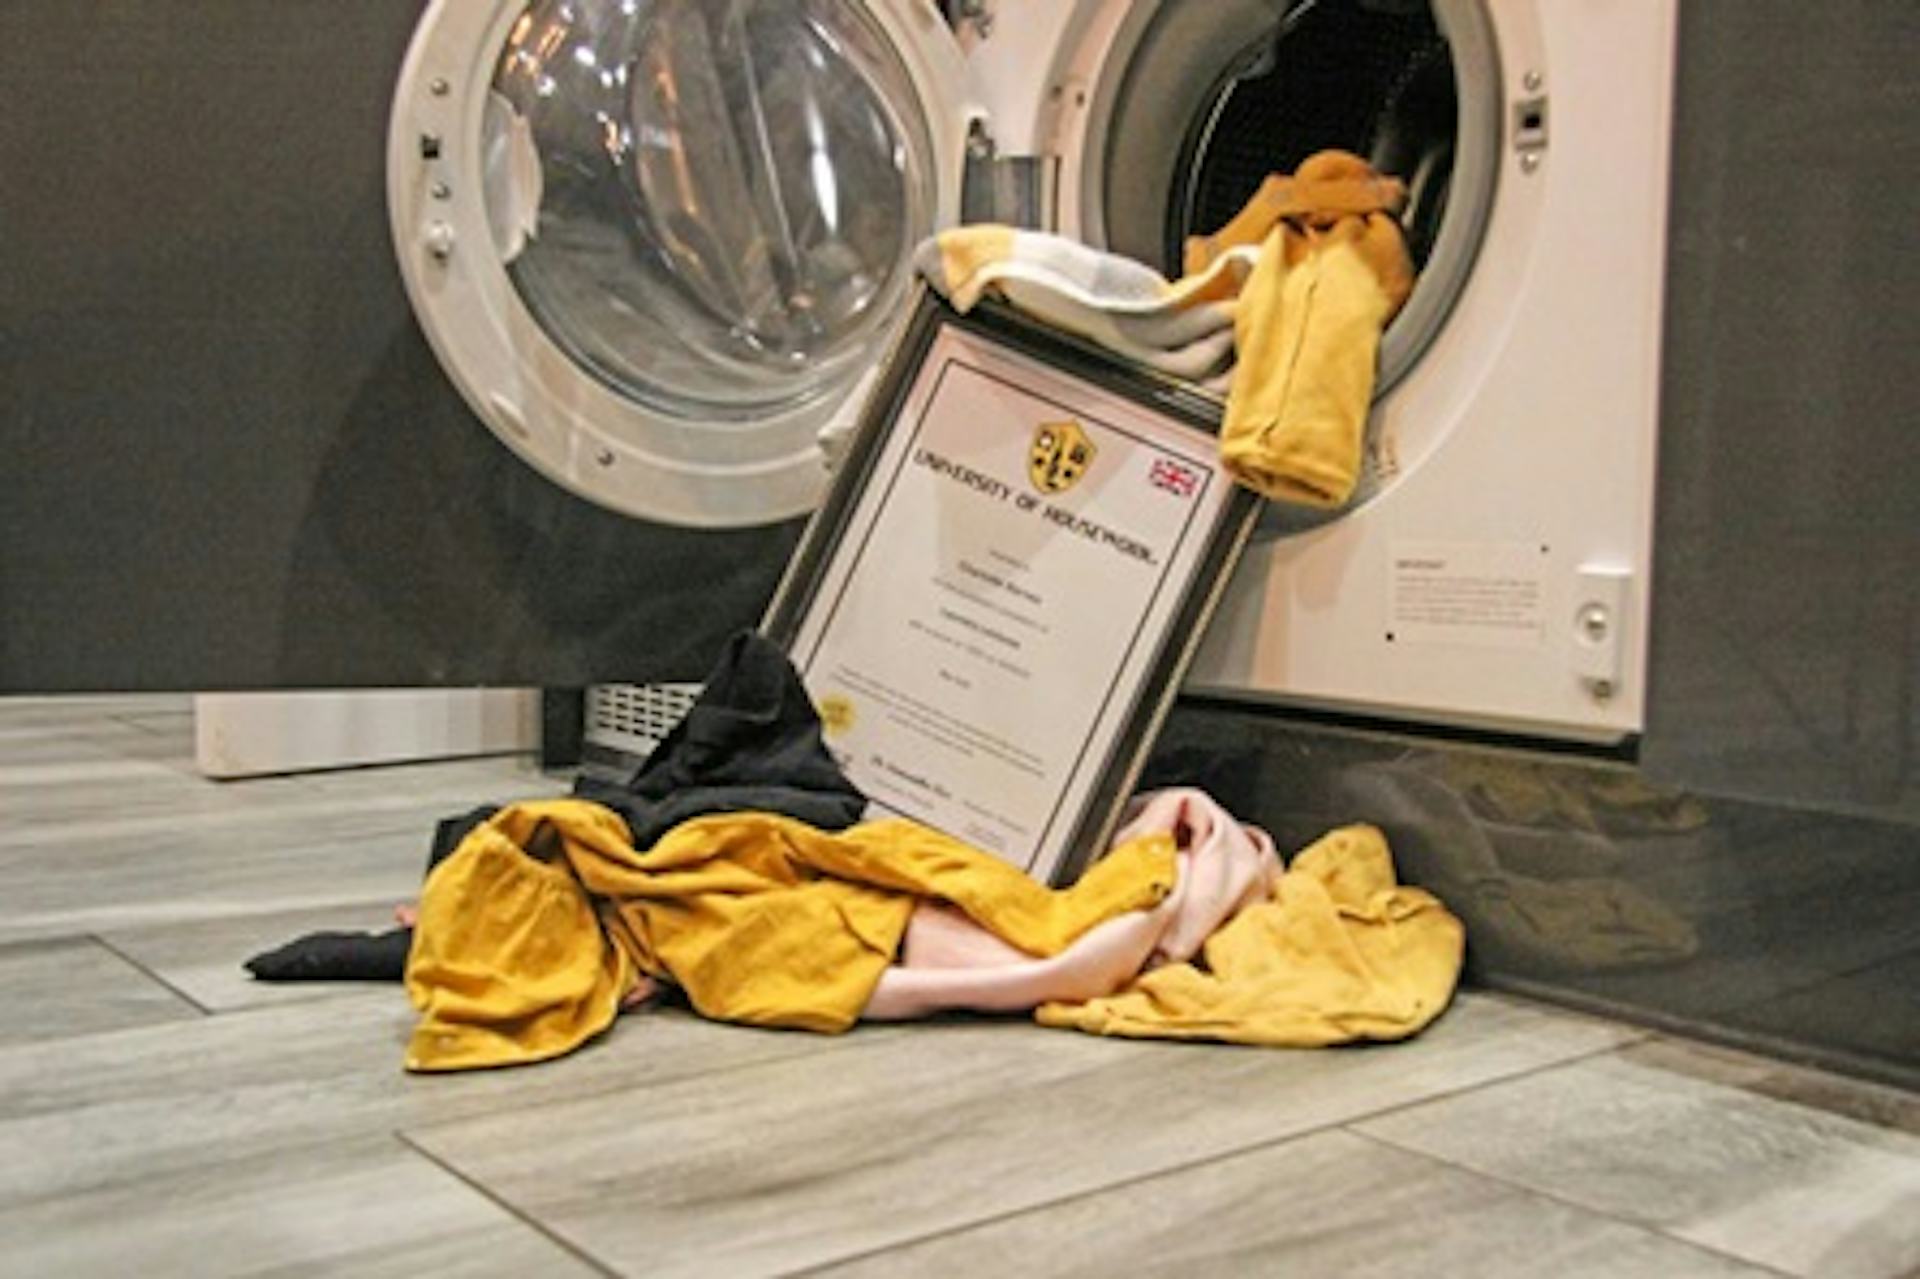 Laundry Lectures Online Training Course with the University of Housework